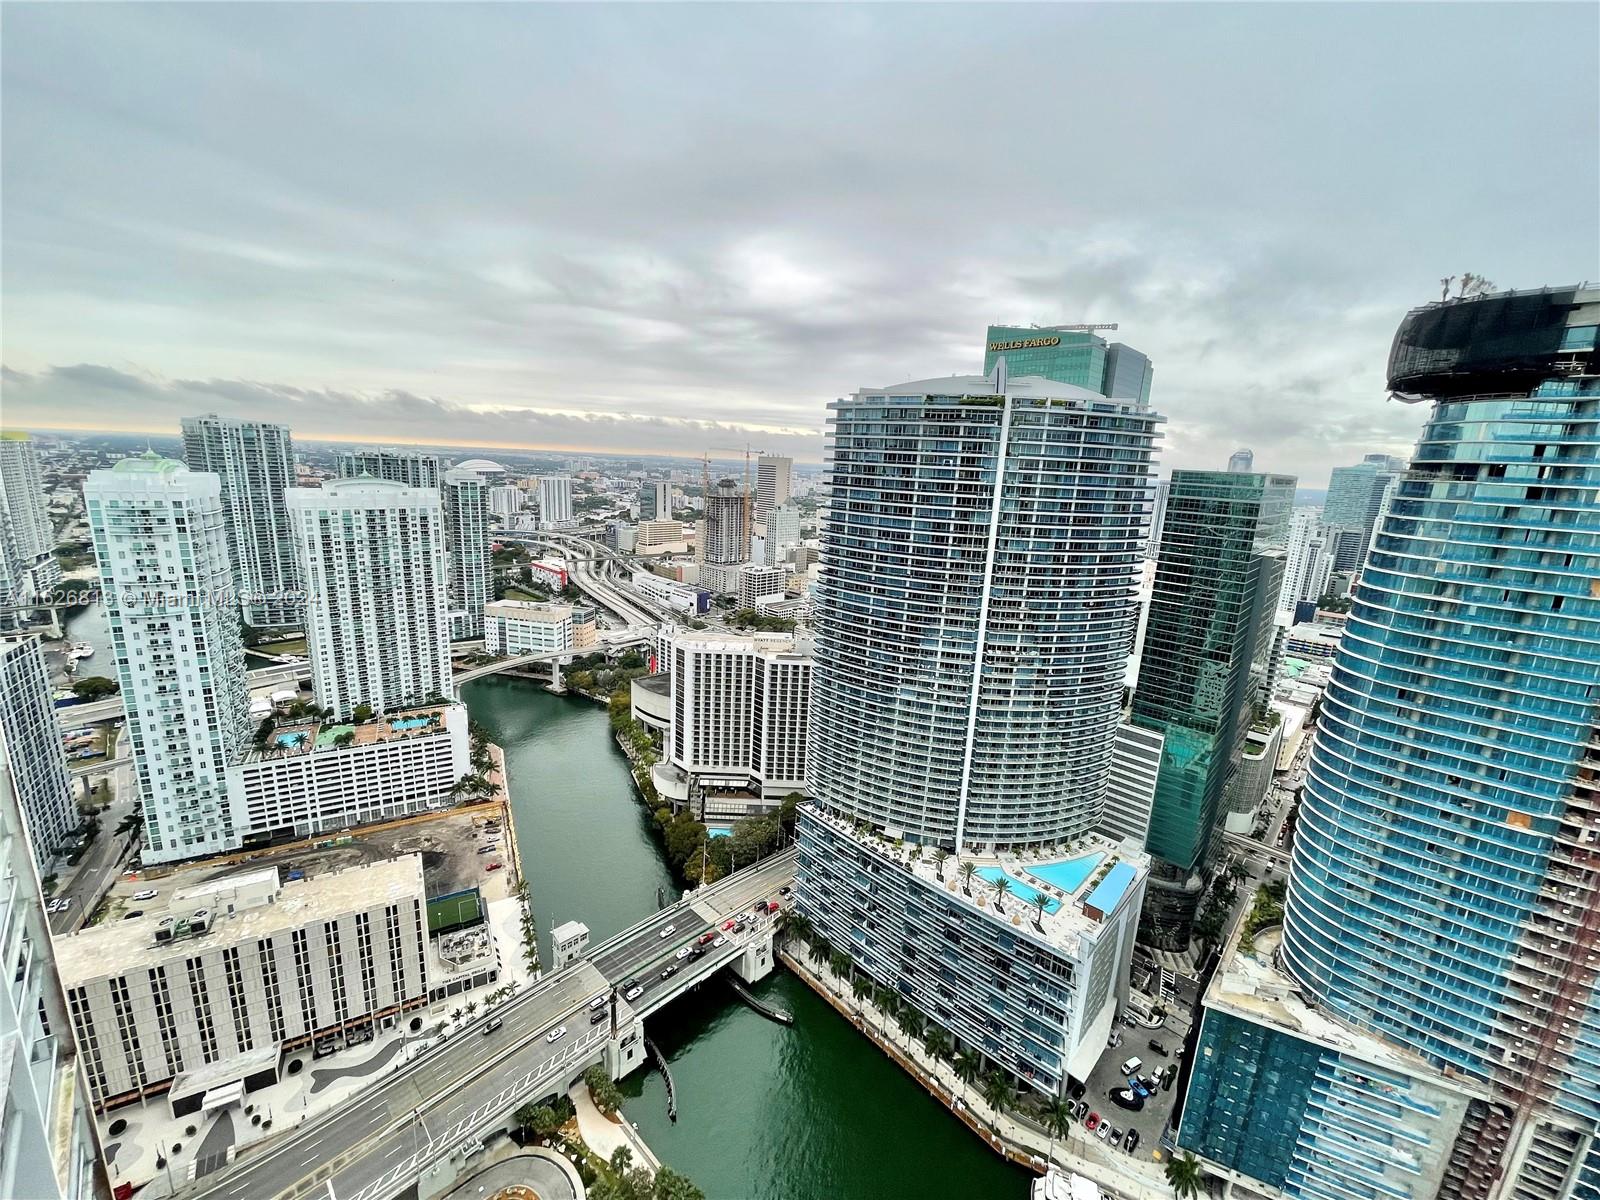 Beautifull 1 Bed/ 1 Bath unit in Icon Brickell with spectacular view of the city from the 49th floor.
INCLUDED 2 ASSIGNED PARKING!!!
Resort style amenities LOCATION, LOCATION, LOCATION!!!! Walking distance to BCC, restaurants, coffee shops and much more.